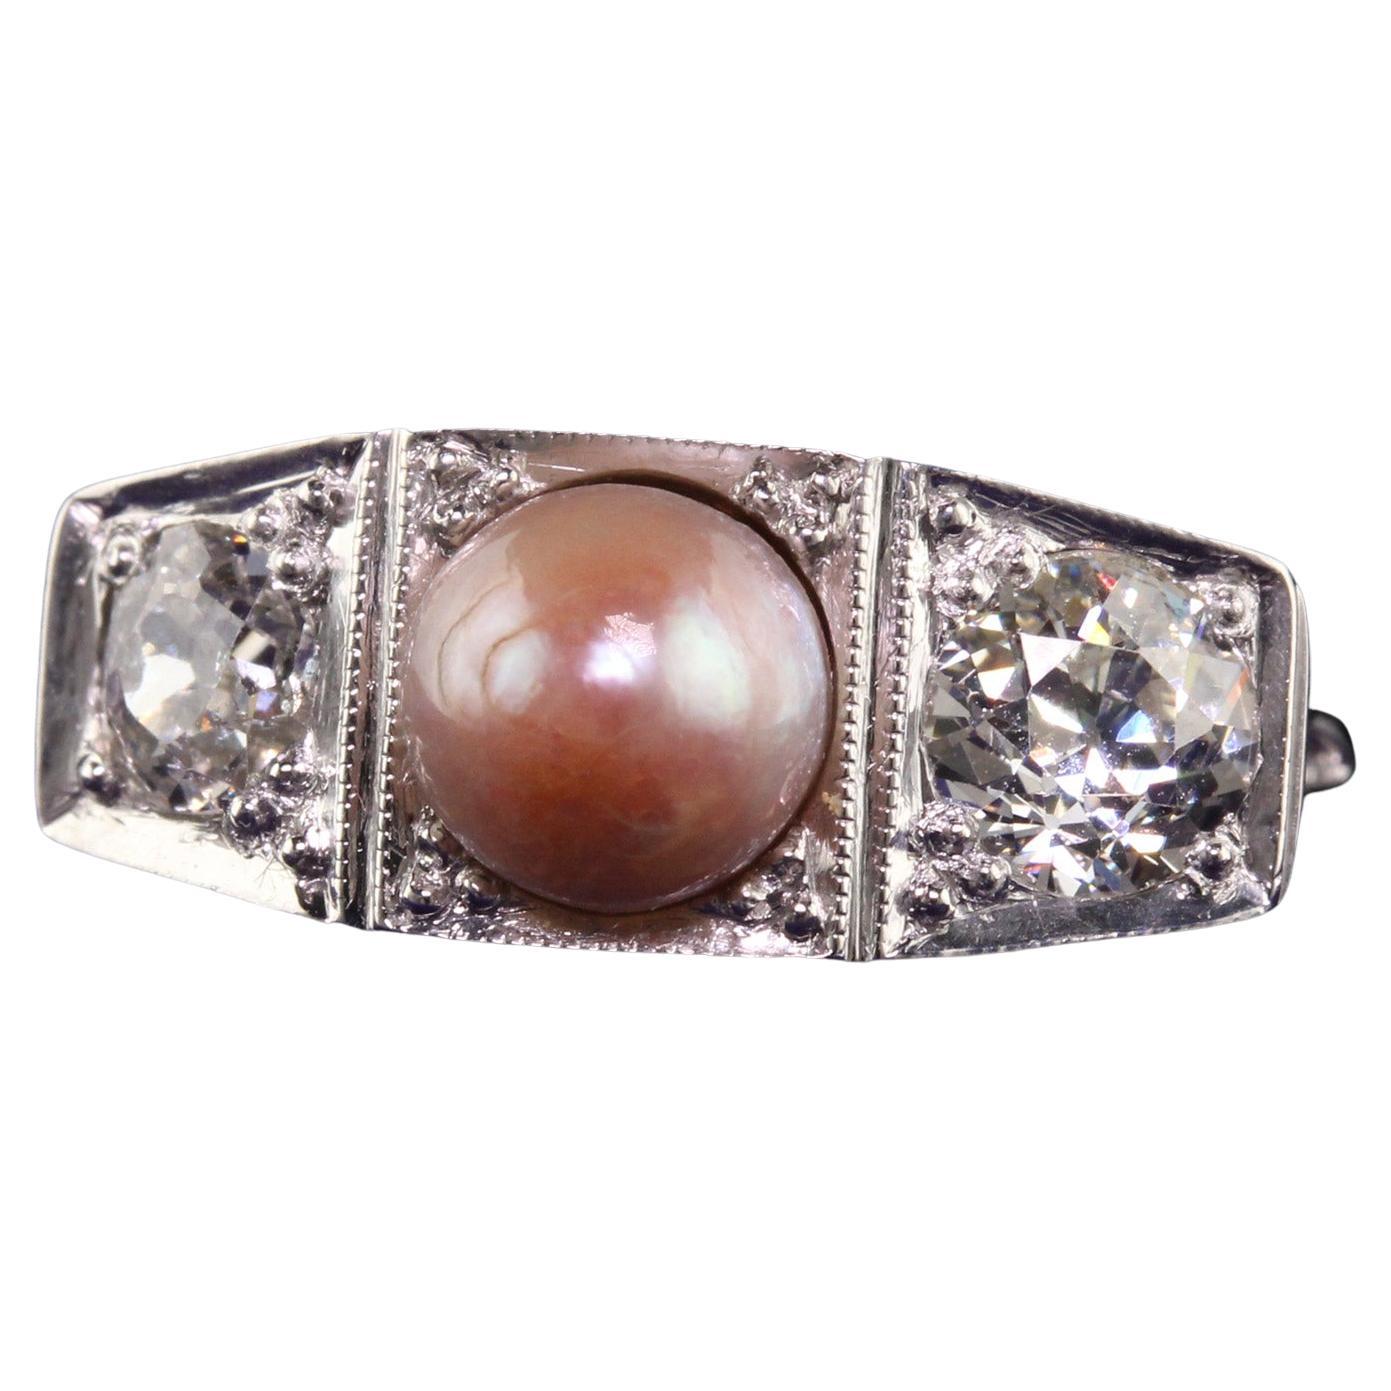 Antique Art Deco 14K White Gold Old European Diamond and Pearl Three Stone Ring For Sale